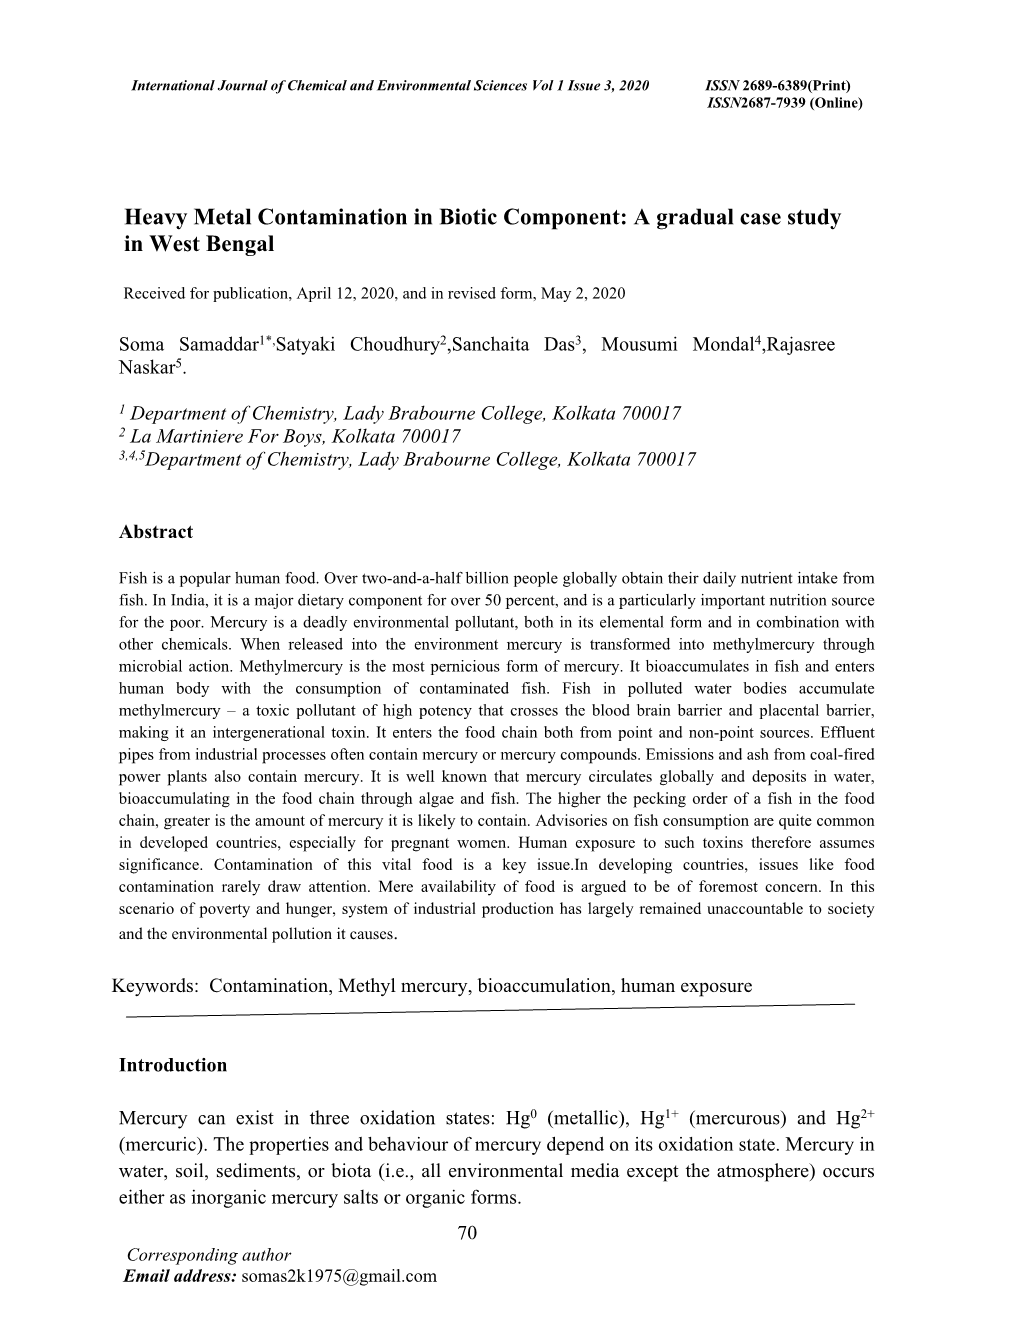 Heavy Metal Contamination in Biotic Component: a Gradual Case Study in West Bengal